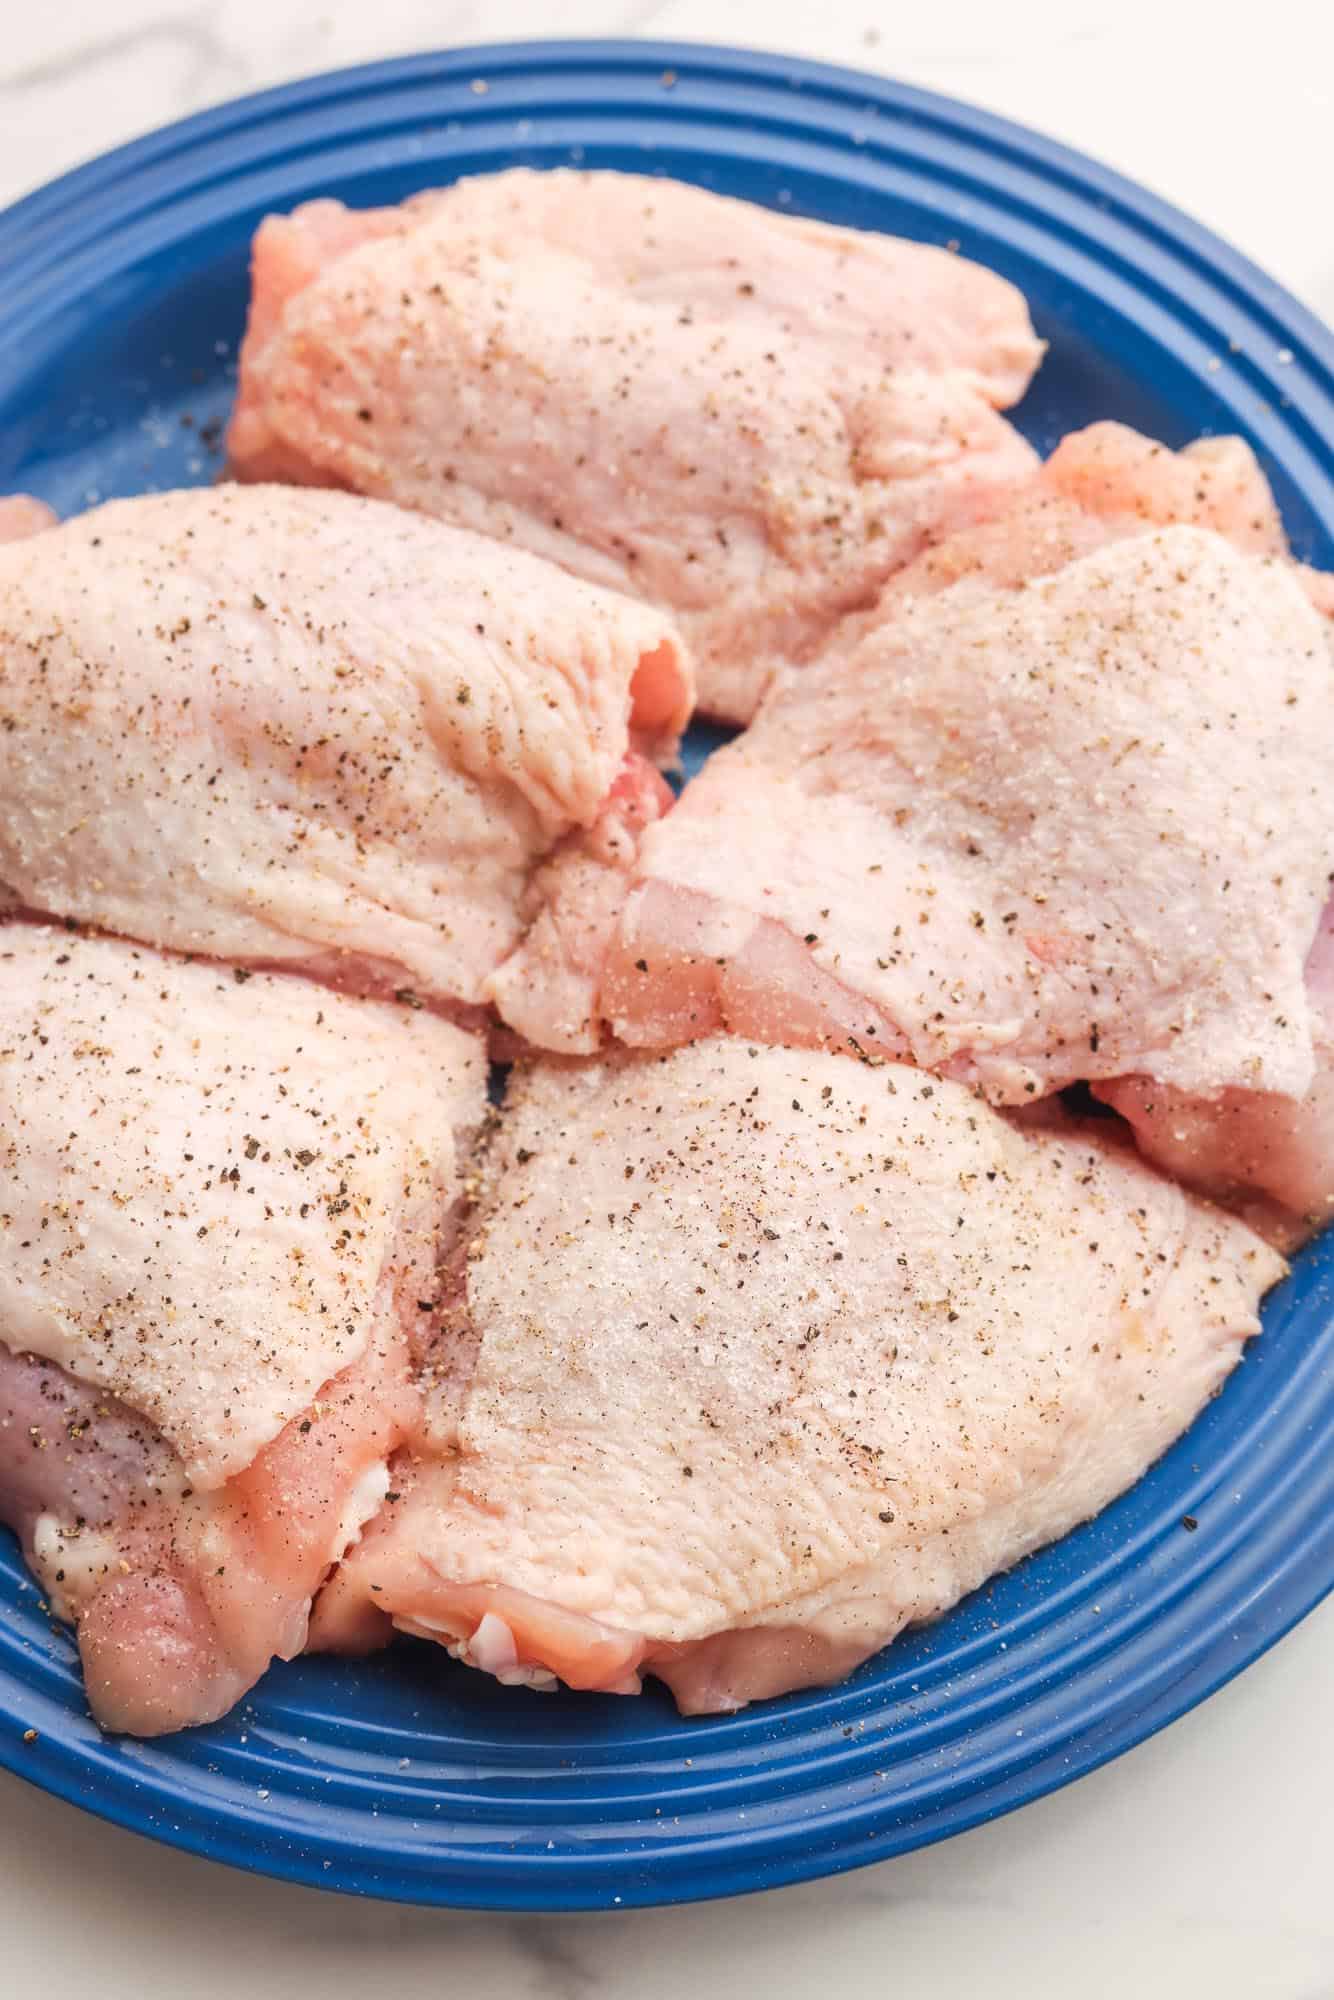 bone in skin on chicken thighs, seasoned with salt and pepper, on a blue plate.